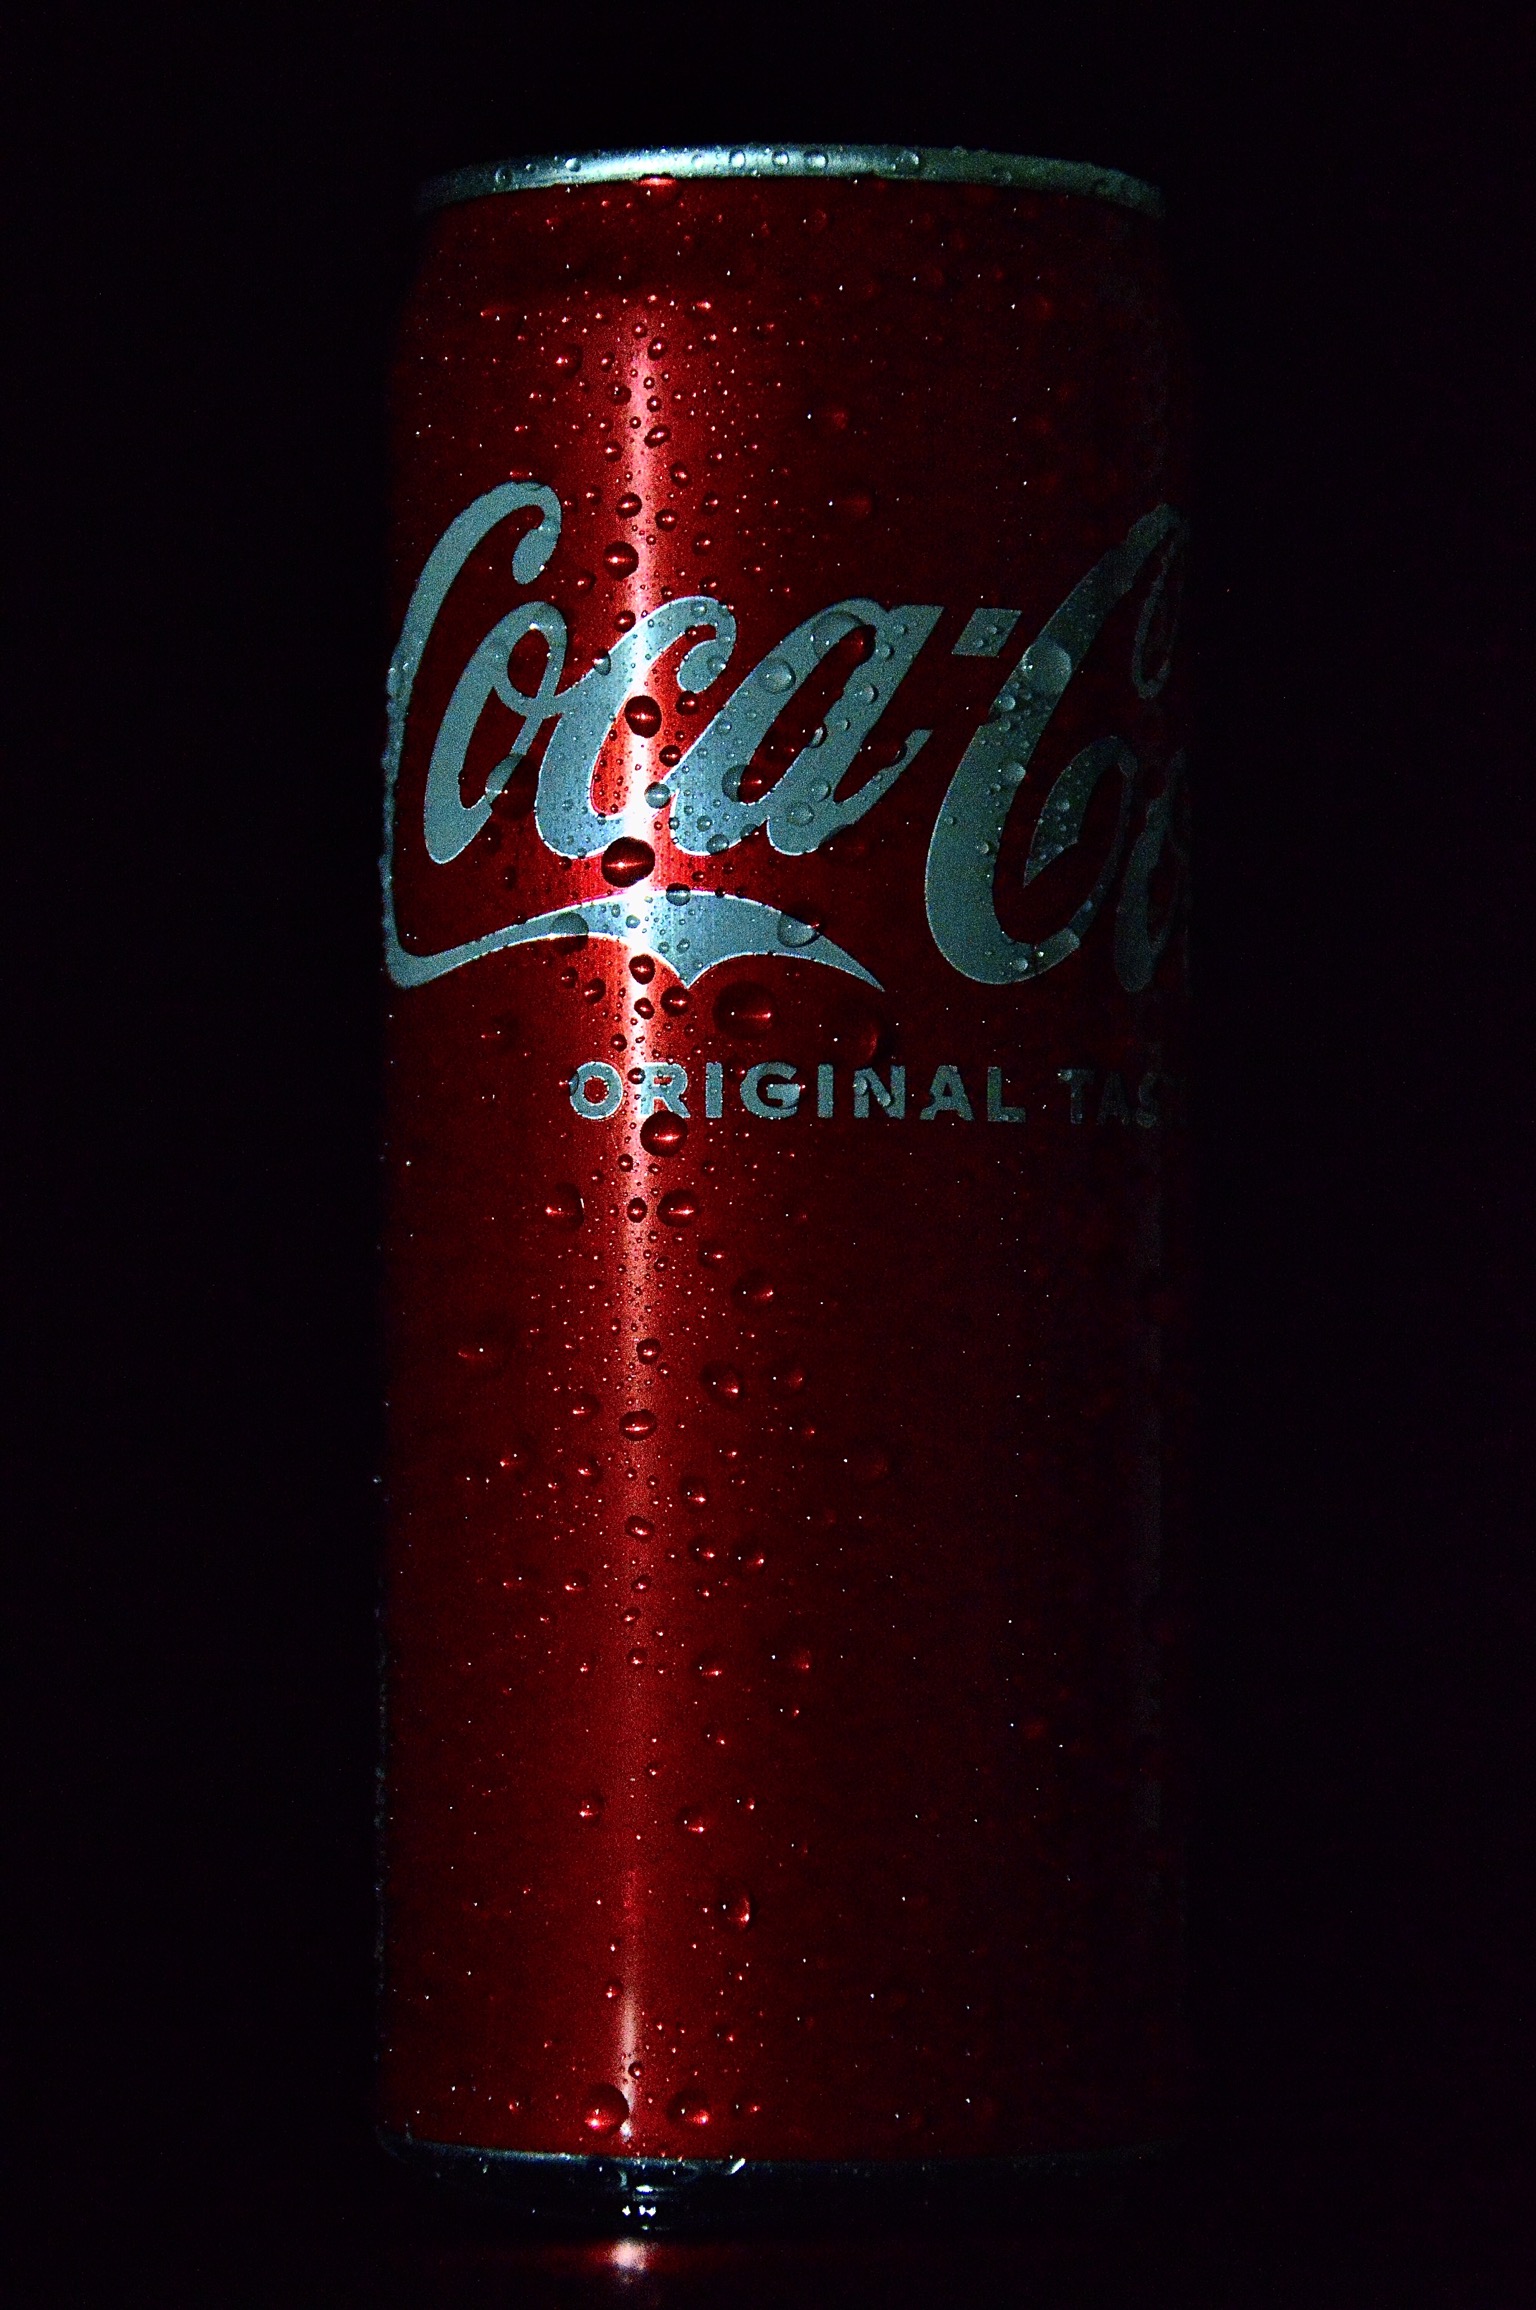 ....Coca Cola....and you are the protagonist ........